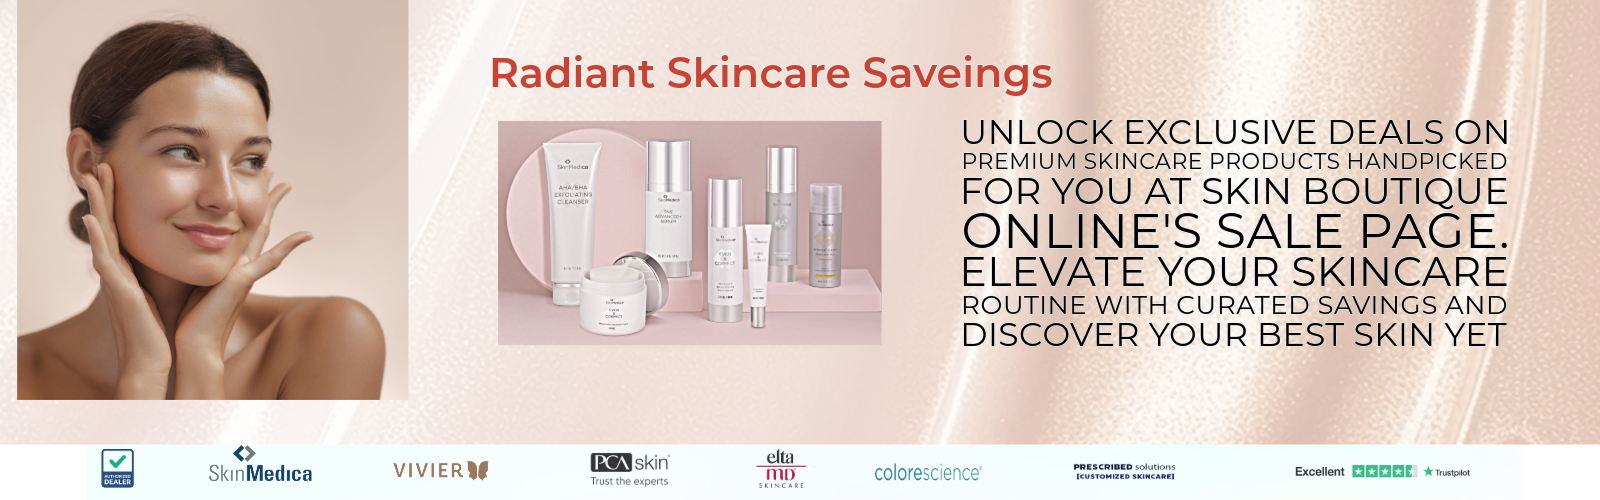 <img src="skin-boutique-sale.jpg" alt="Skin Boutique Online Sales Promotion - Great Deals, Big Savings, and Exclusive Discounts on Skincare Products">